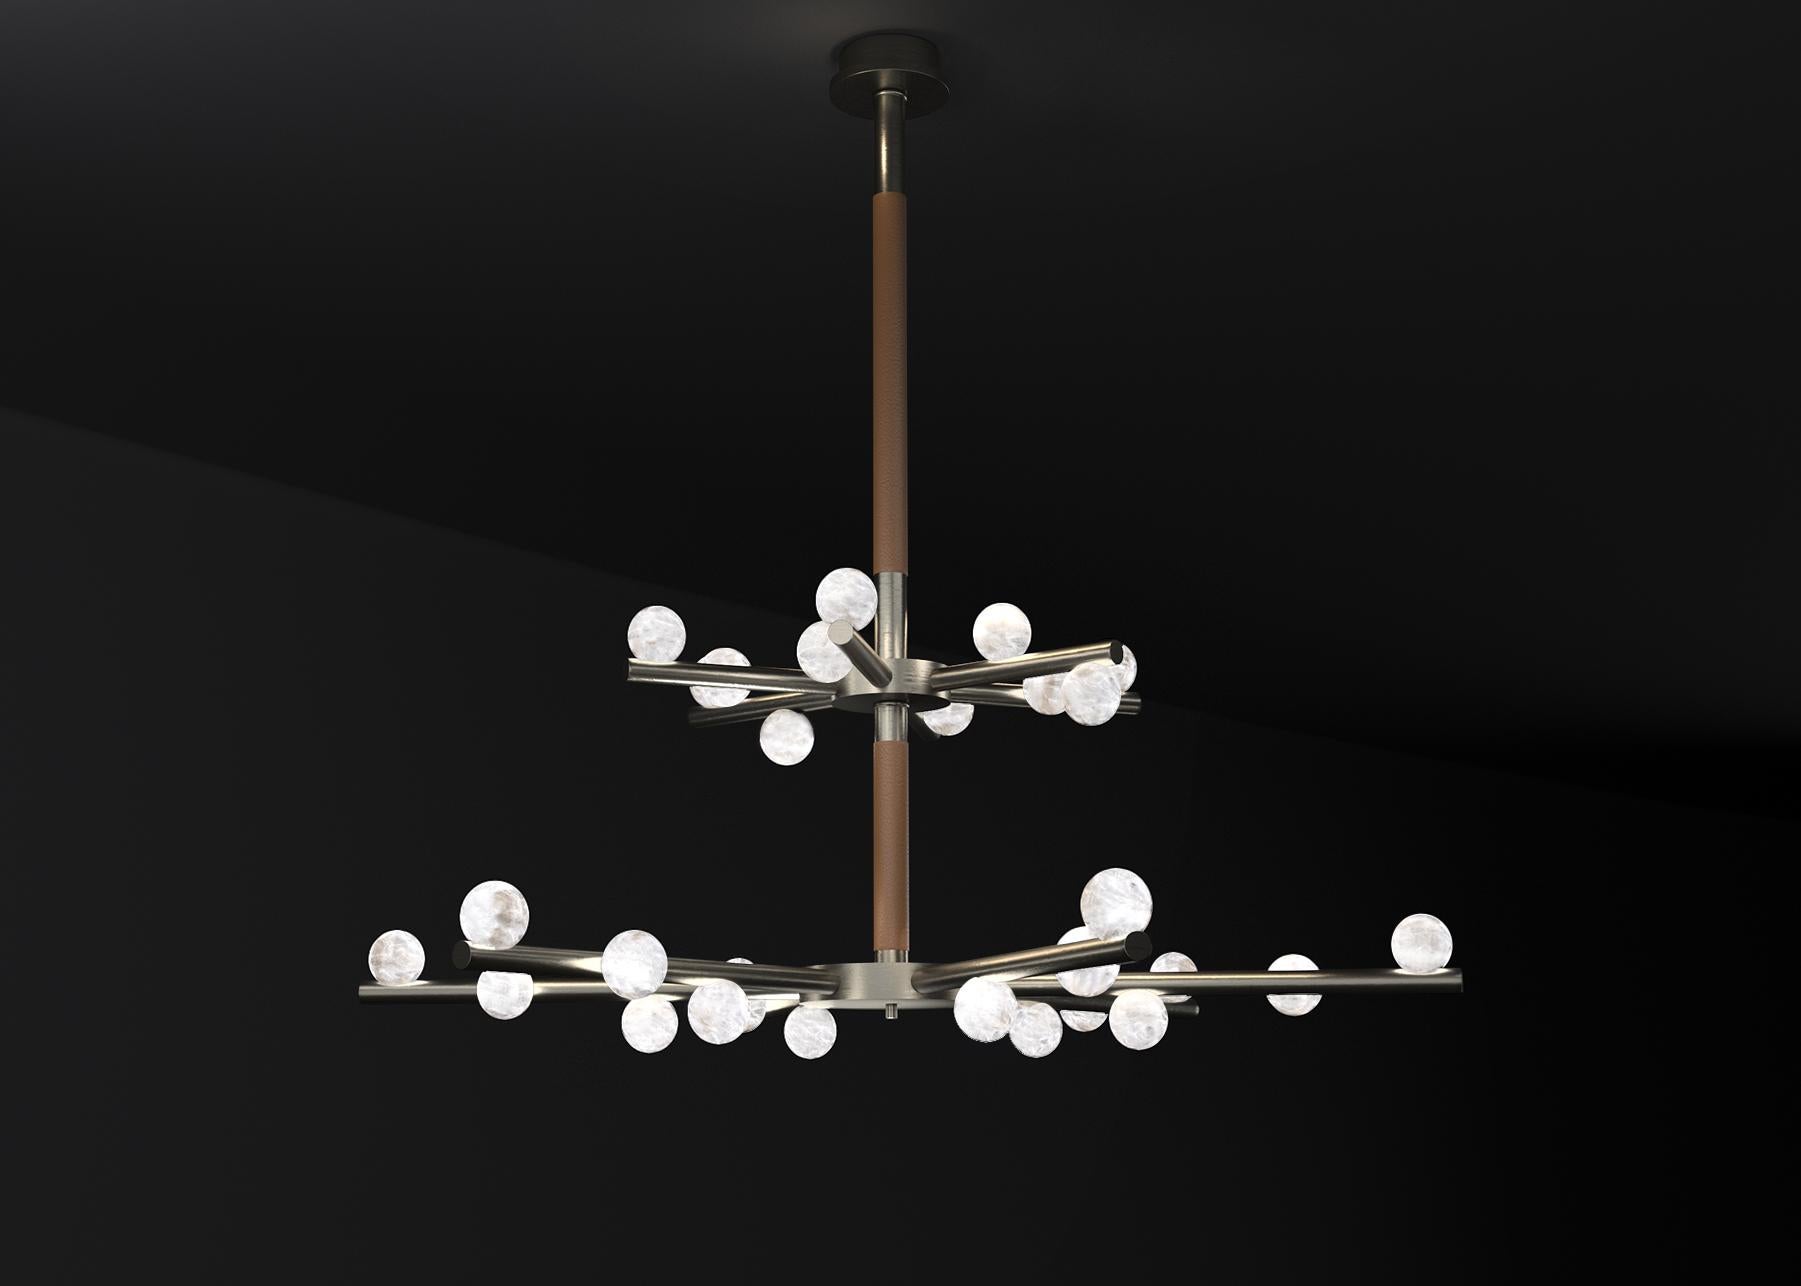 Demetra Brushed Black Metal Double Chandelier by Alabastro Italiano
Dimensions: D 85 x W 97 x H 96 cm.
Materials: White alabaster, brushed black metal and leather.

Available in different finishes: Shiny Silver, Bronze, Brushed Brass, Ruggine of